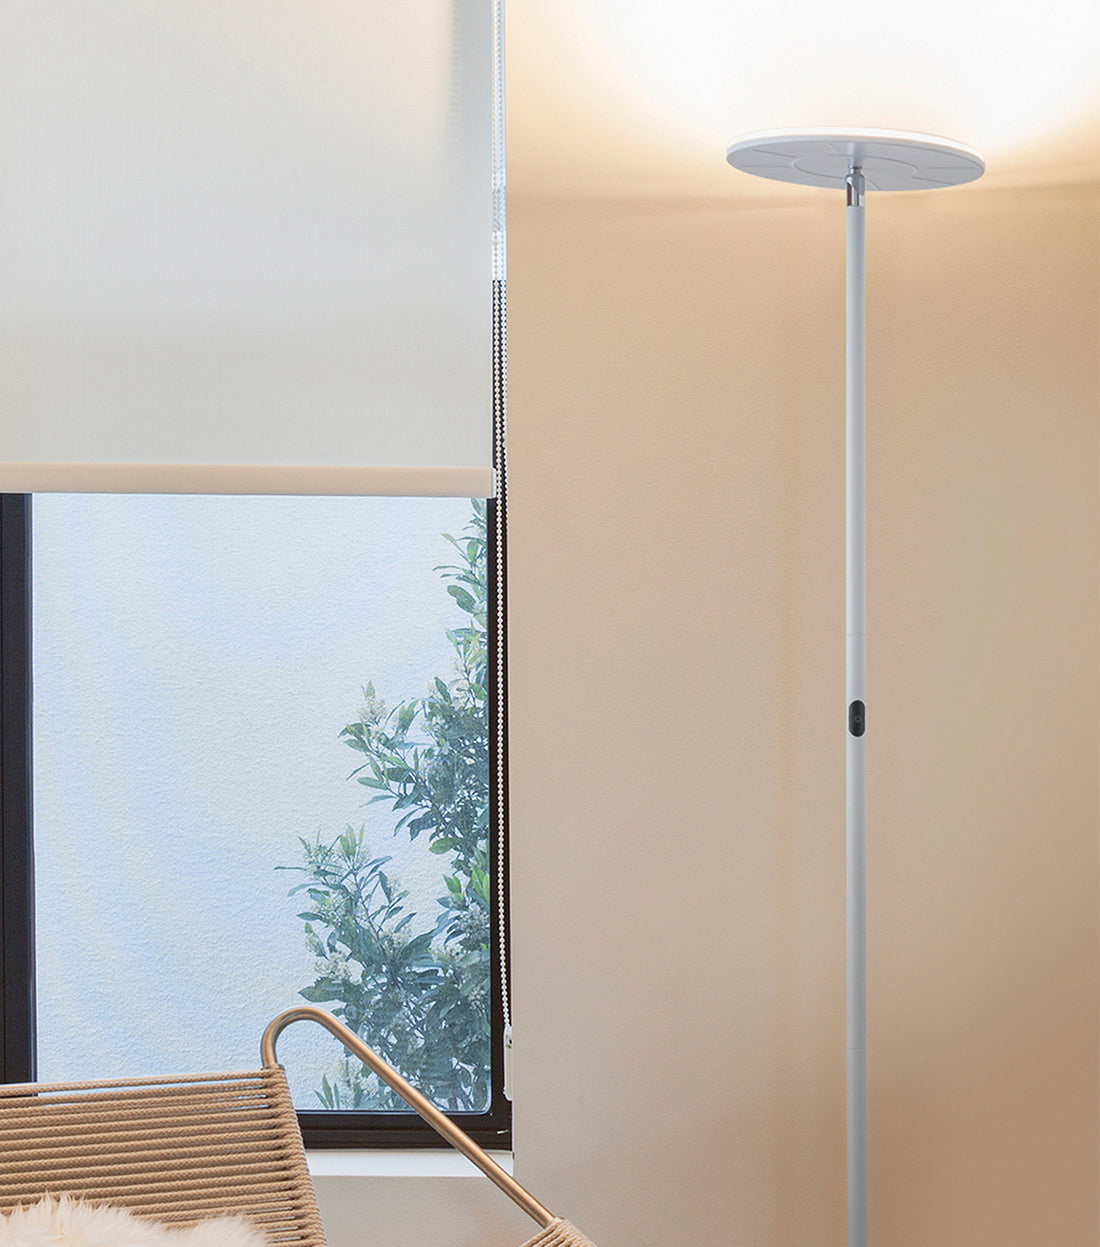 Brightech Sky Flux - The Very Bright LED Torchiere Floor Lamp, for Your Living Room & Office - Halogen Lamp Alternative with 3 Light Options Incl. Daylight - Dimmable Modern Uplight